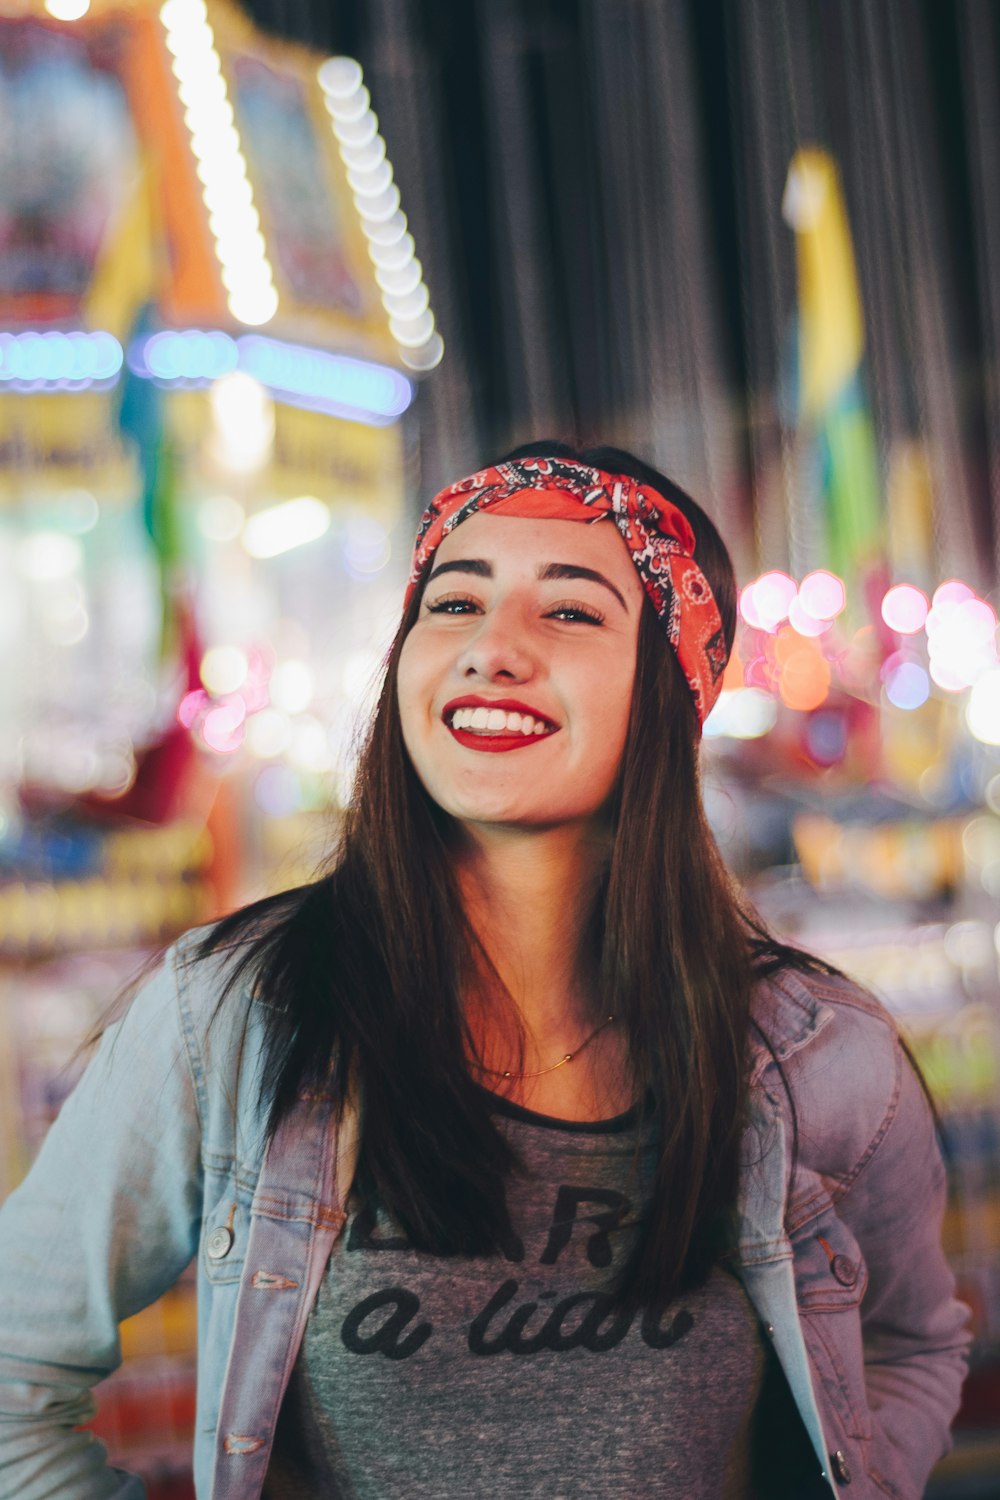 Headband Pictures | Download Free Images on Unsplash